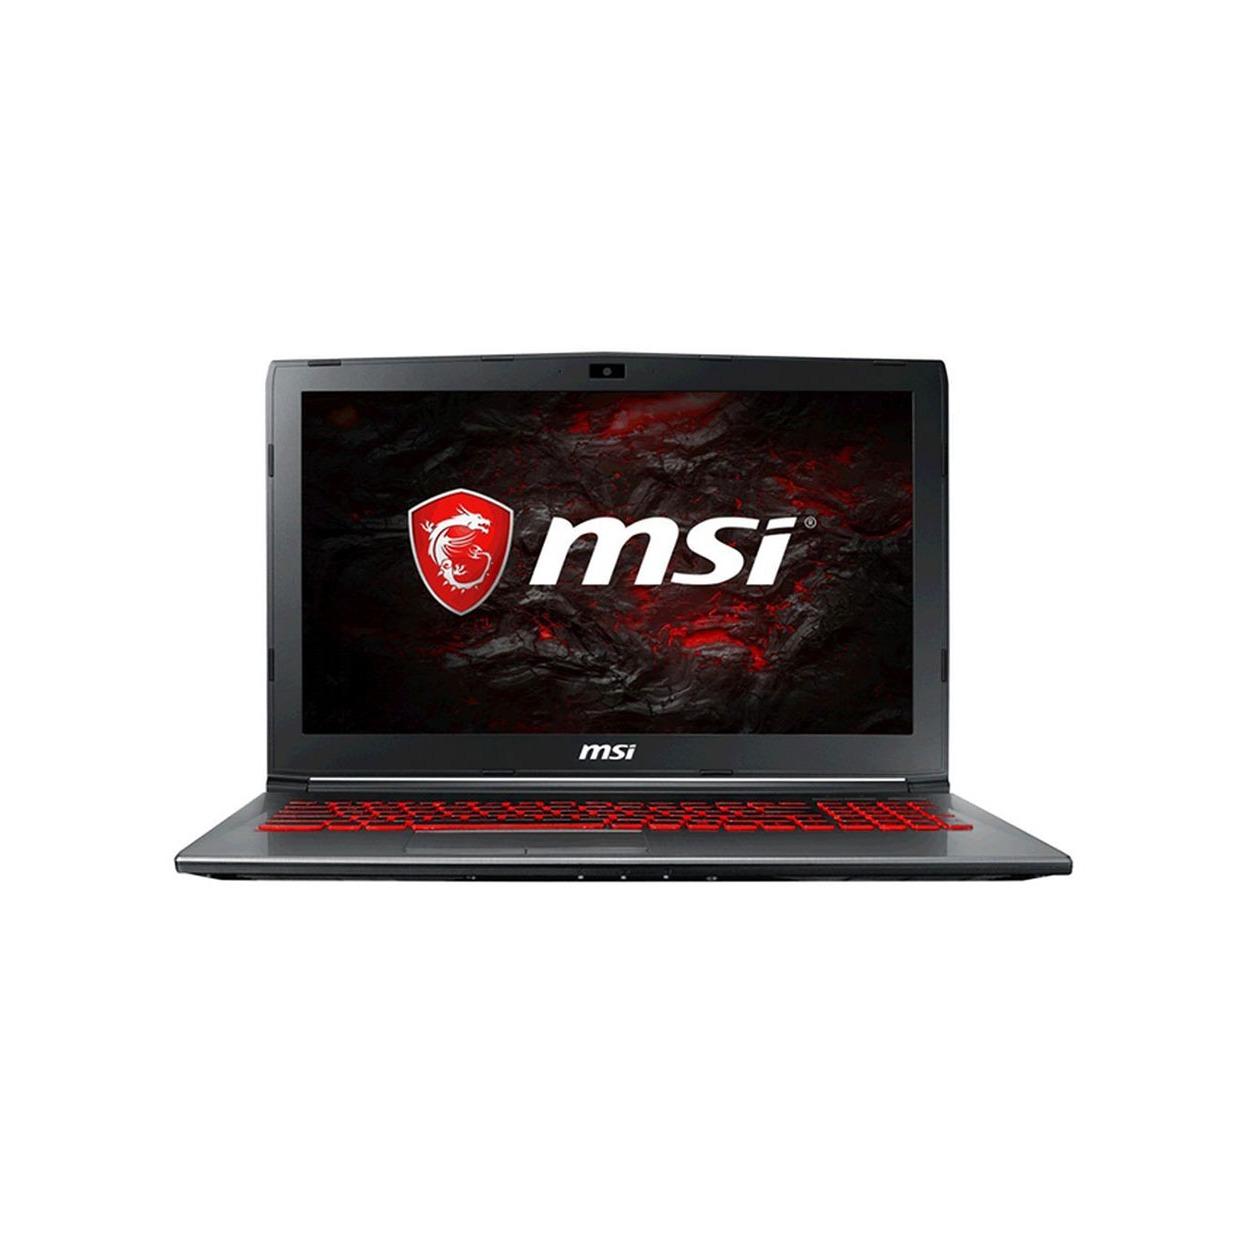 Laptop MSI GAMING GV72 7RE-1494VN 1050Ti / Win10.Chủng loại GV72 7RE.Part Number 1494VN